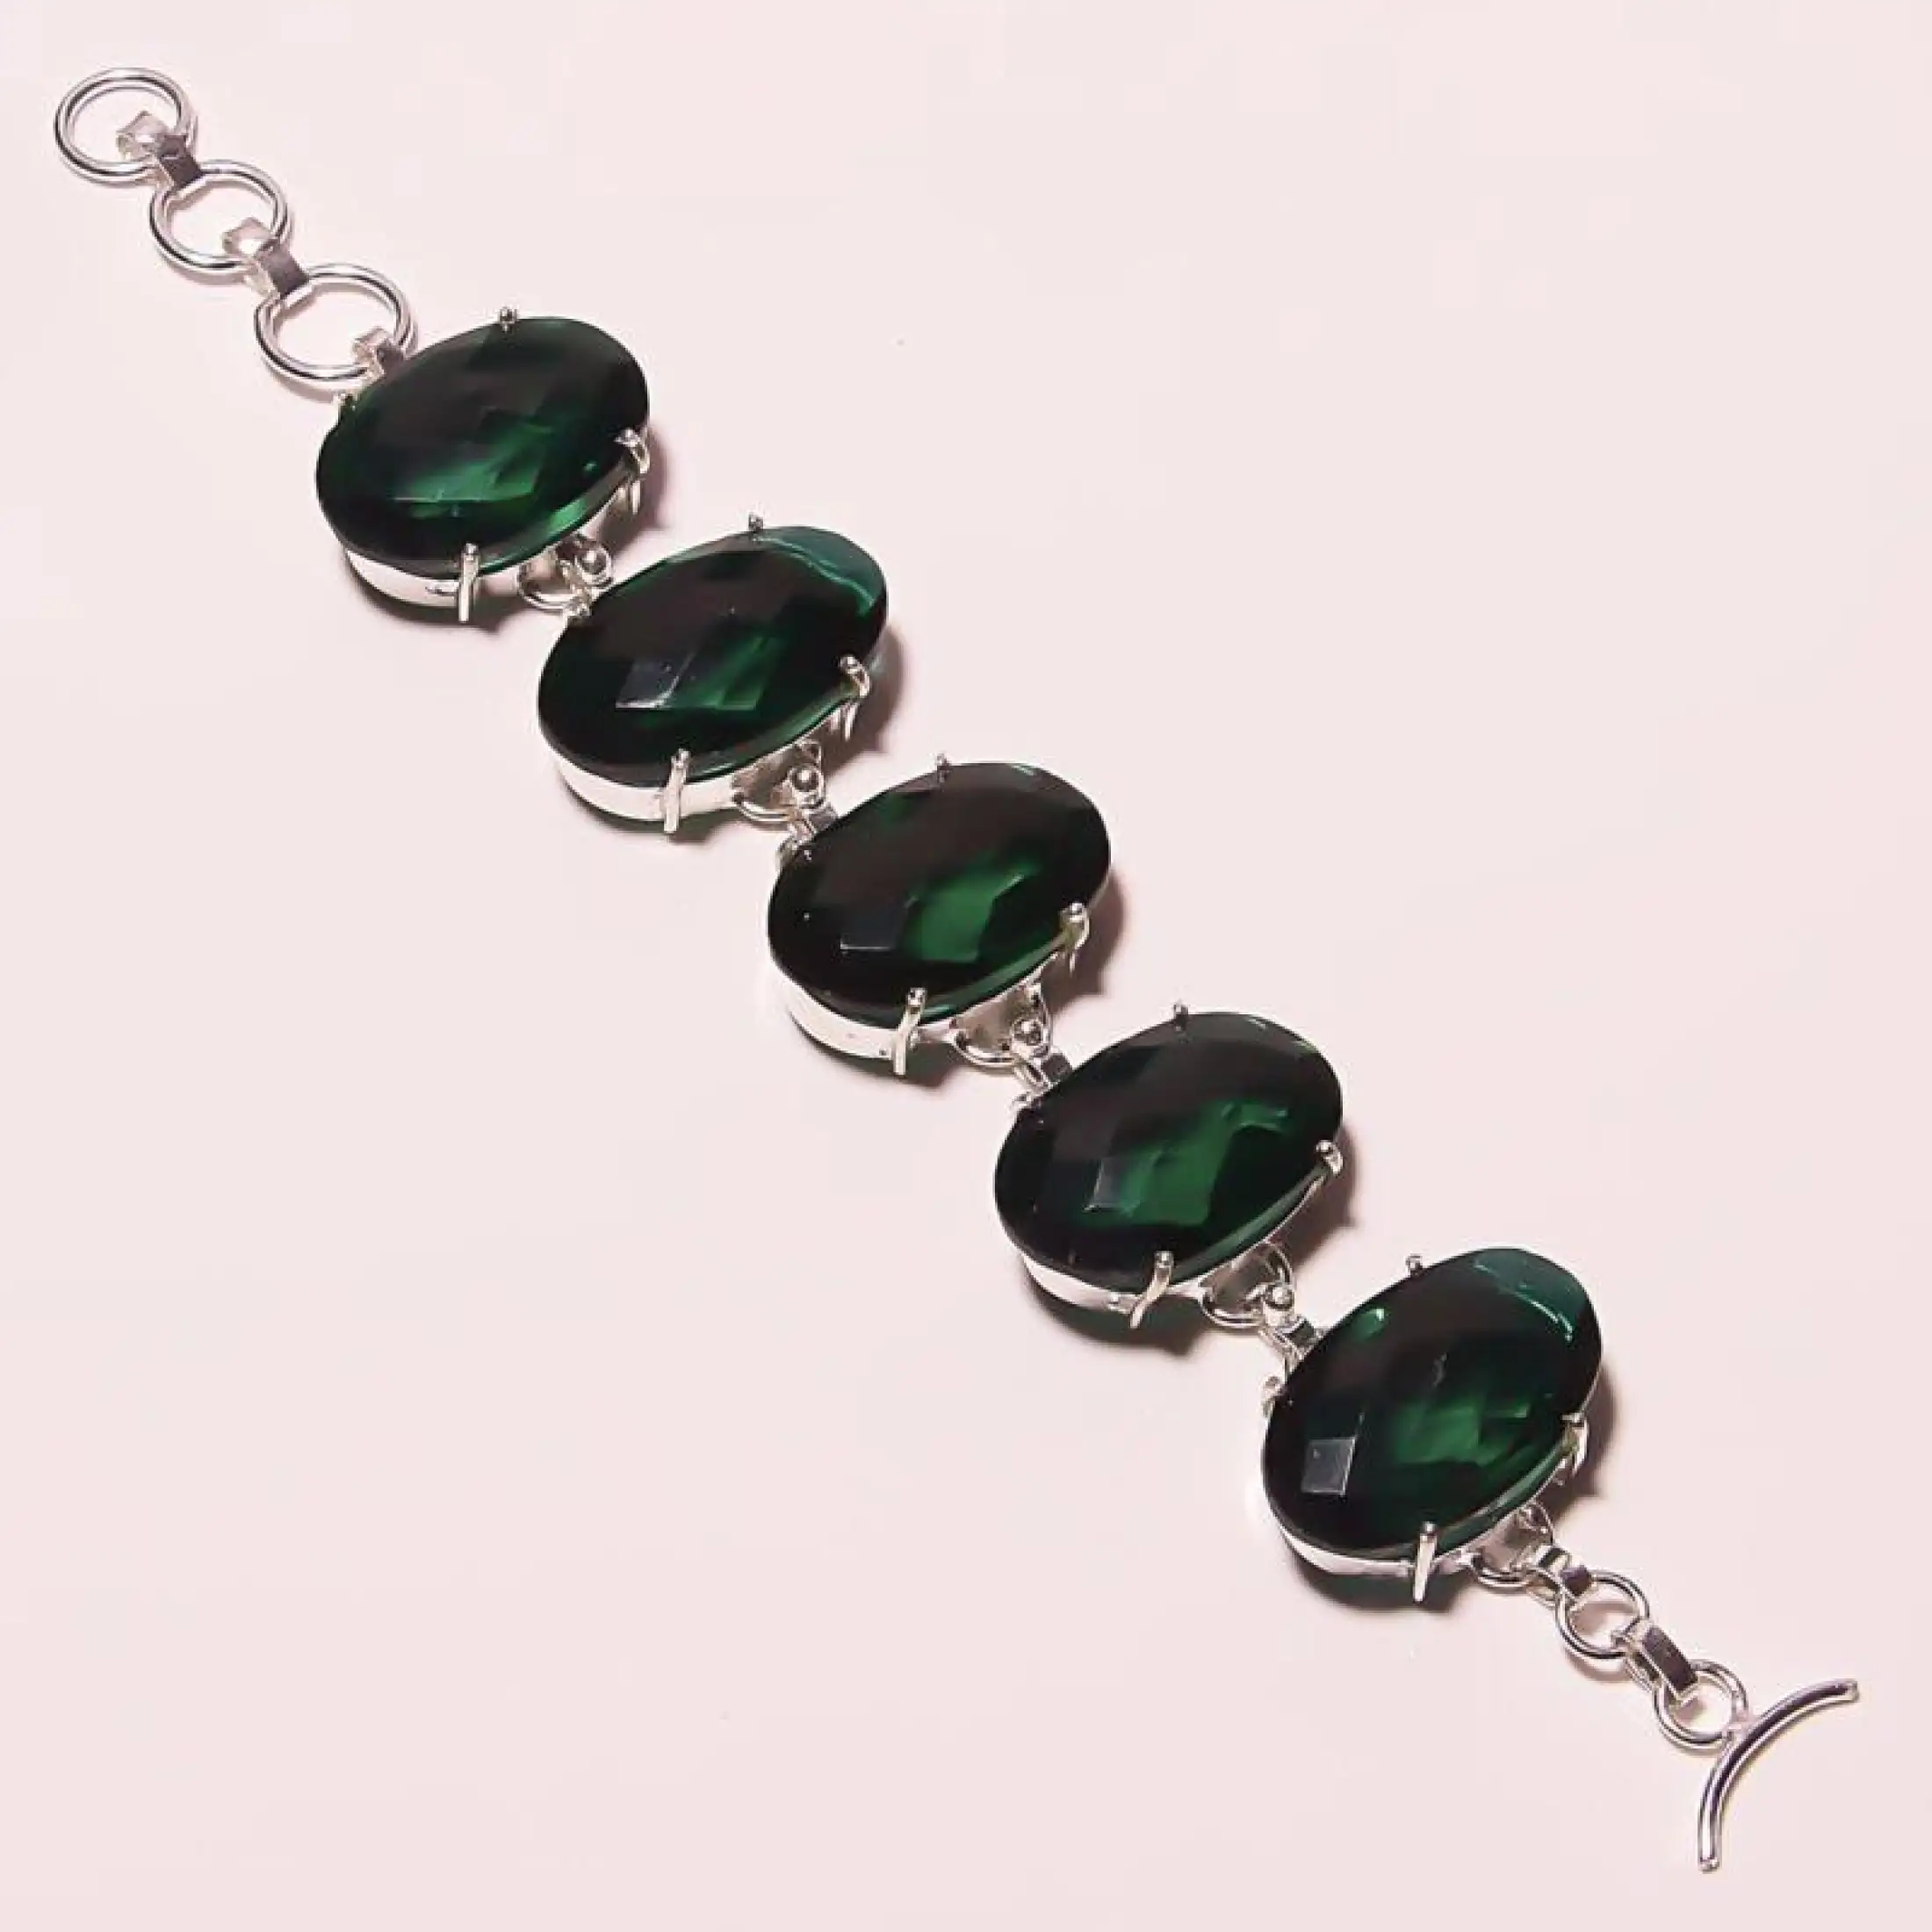 Faceted Emerald Chrome Diopside Quartz Jewellery Silver Plated Bracelet 18 Gm